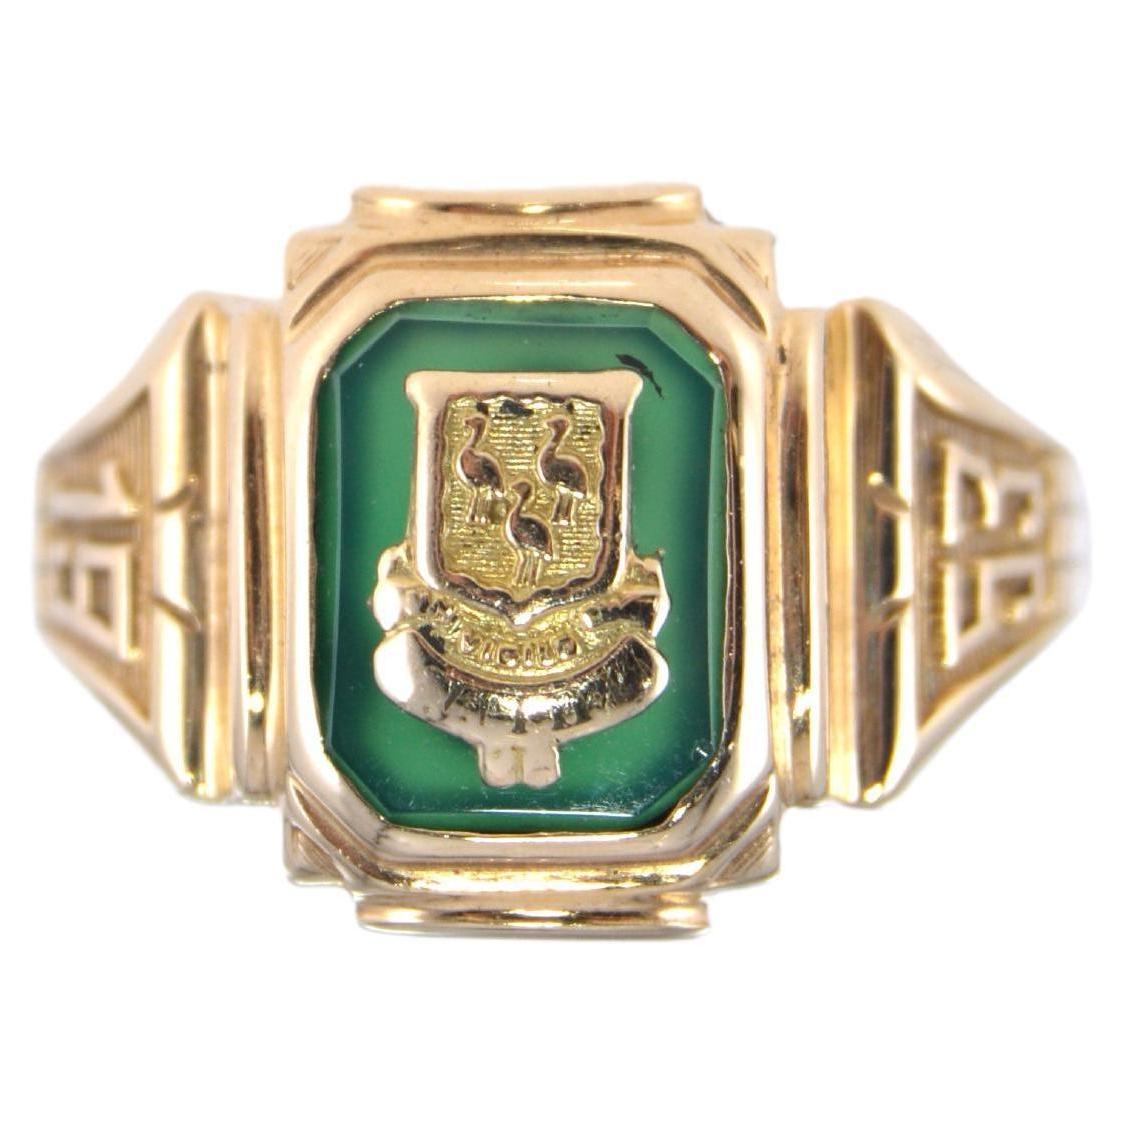 Unisex Art Deco Signet Ring in 10 Karat Solid Gold with Gold Inset from 1953